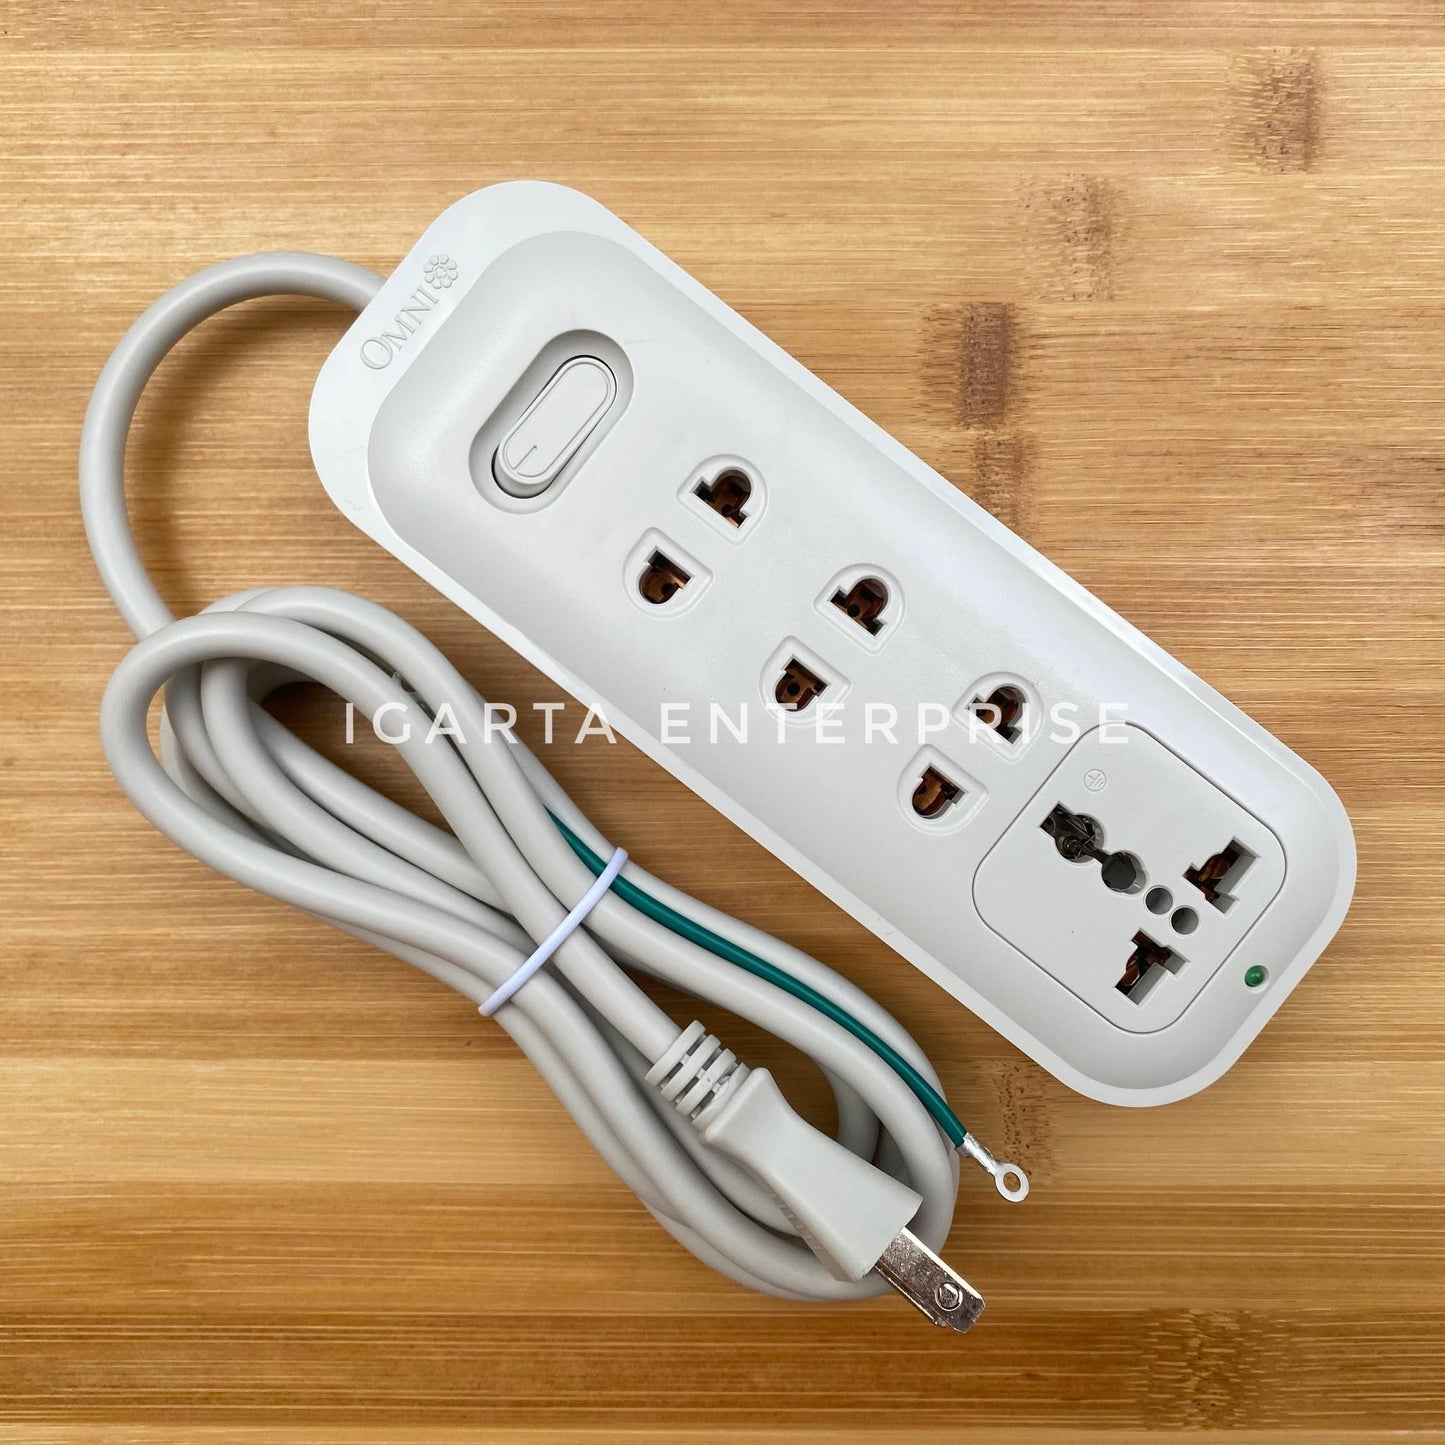 OMNI Extension Cord Set w/ Universal Outlet & Switch WER 103